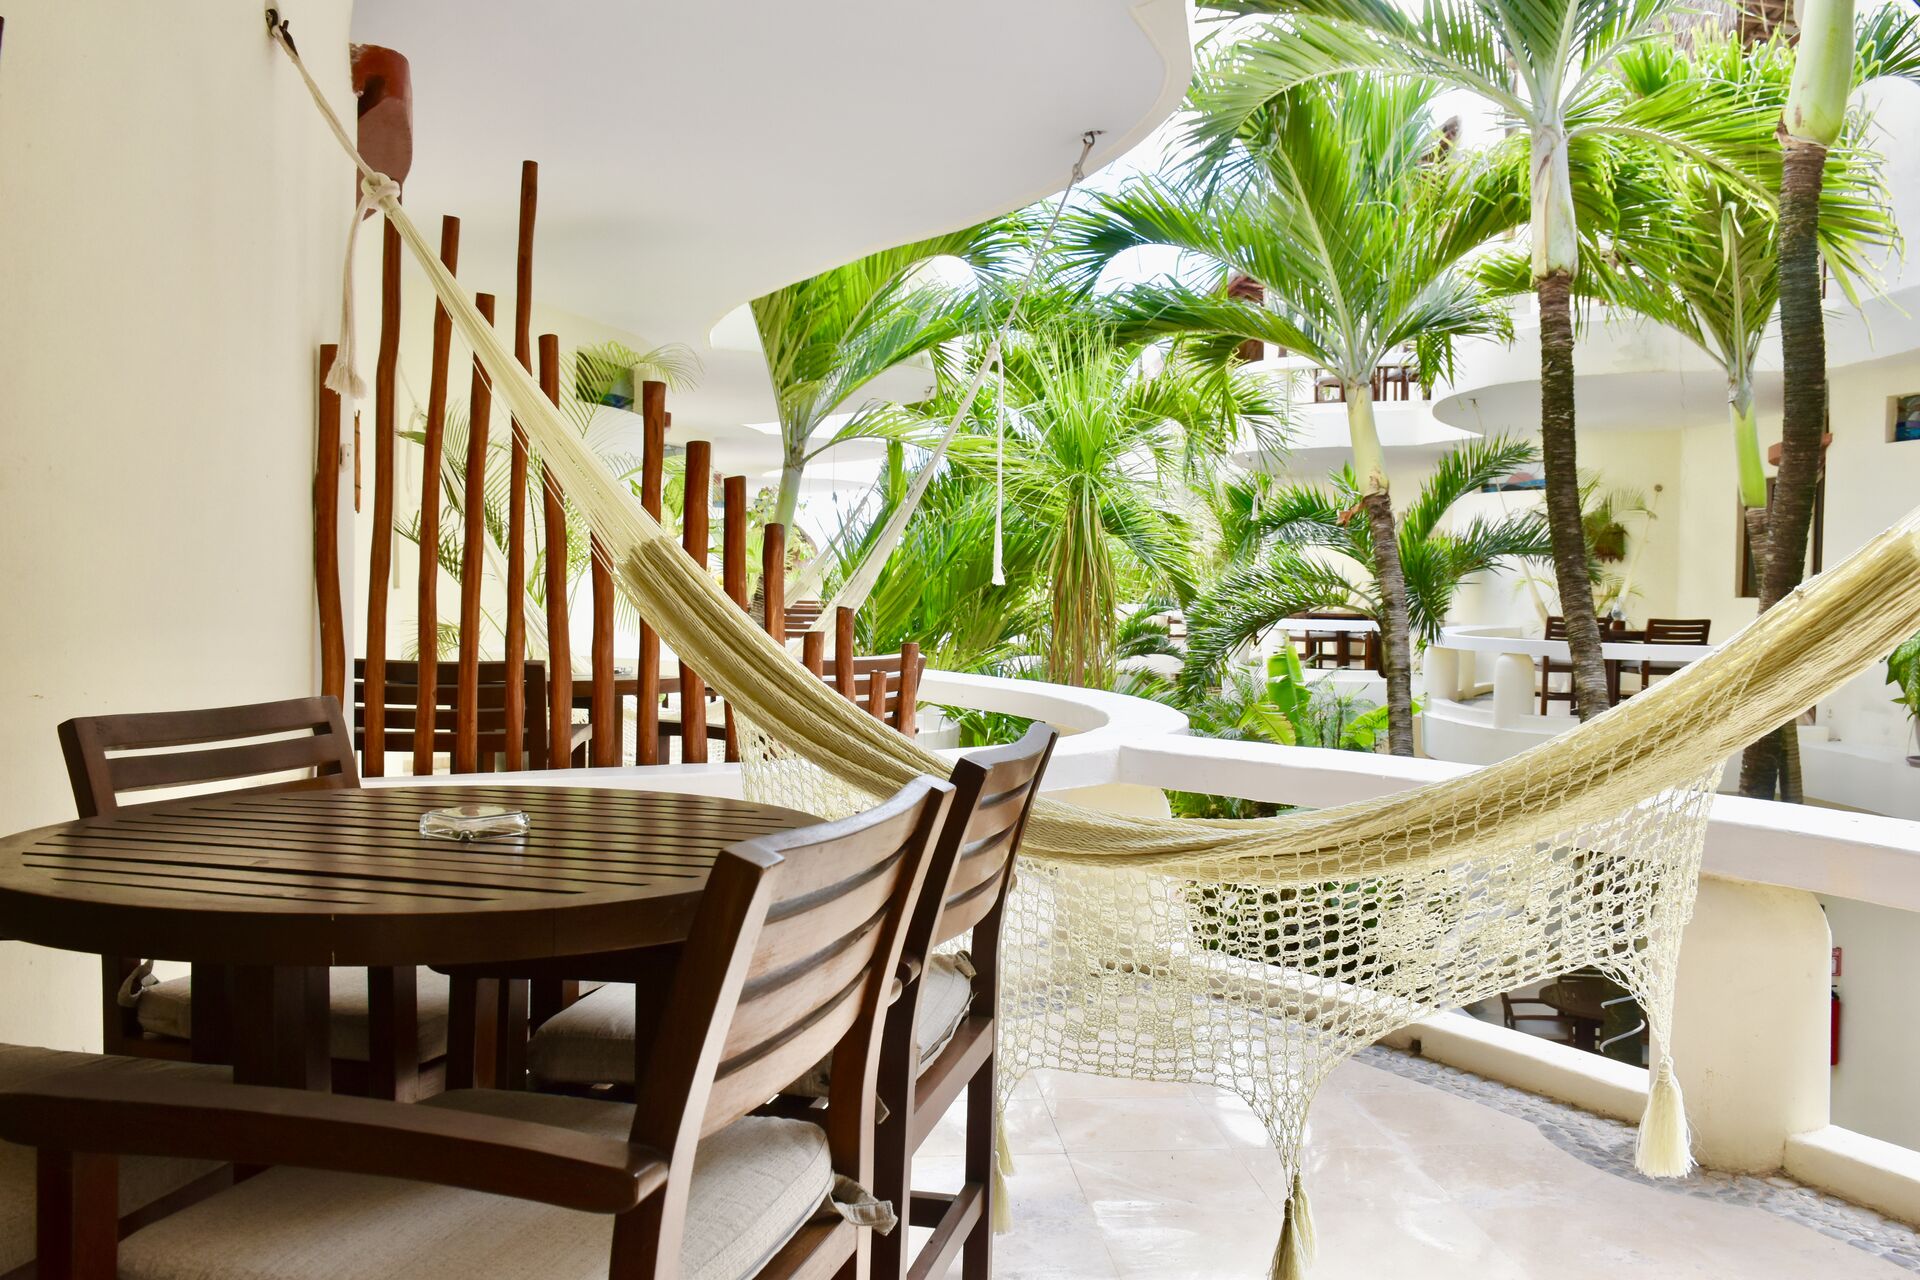 Large balcony with chairs and hammock.